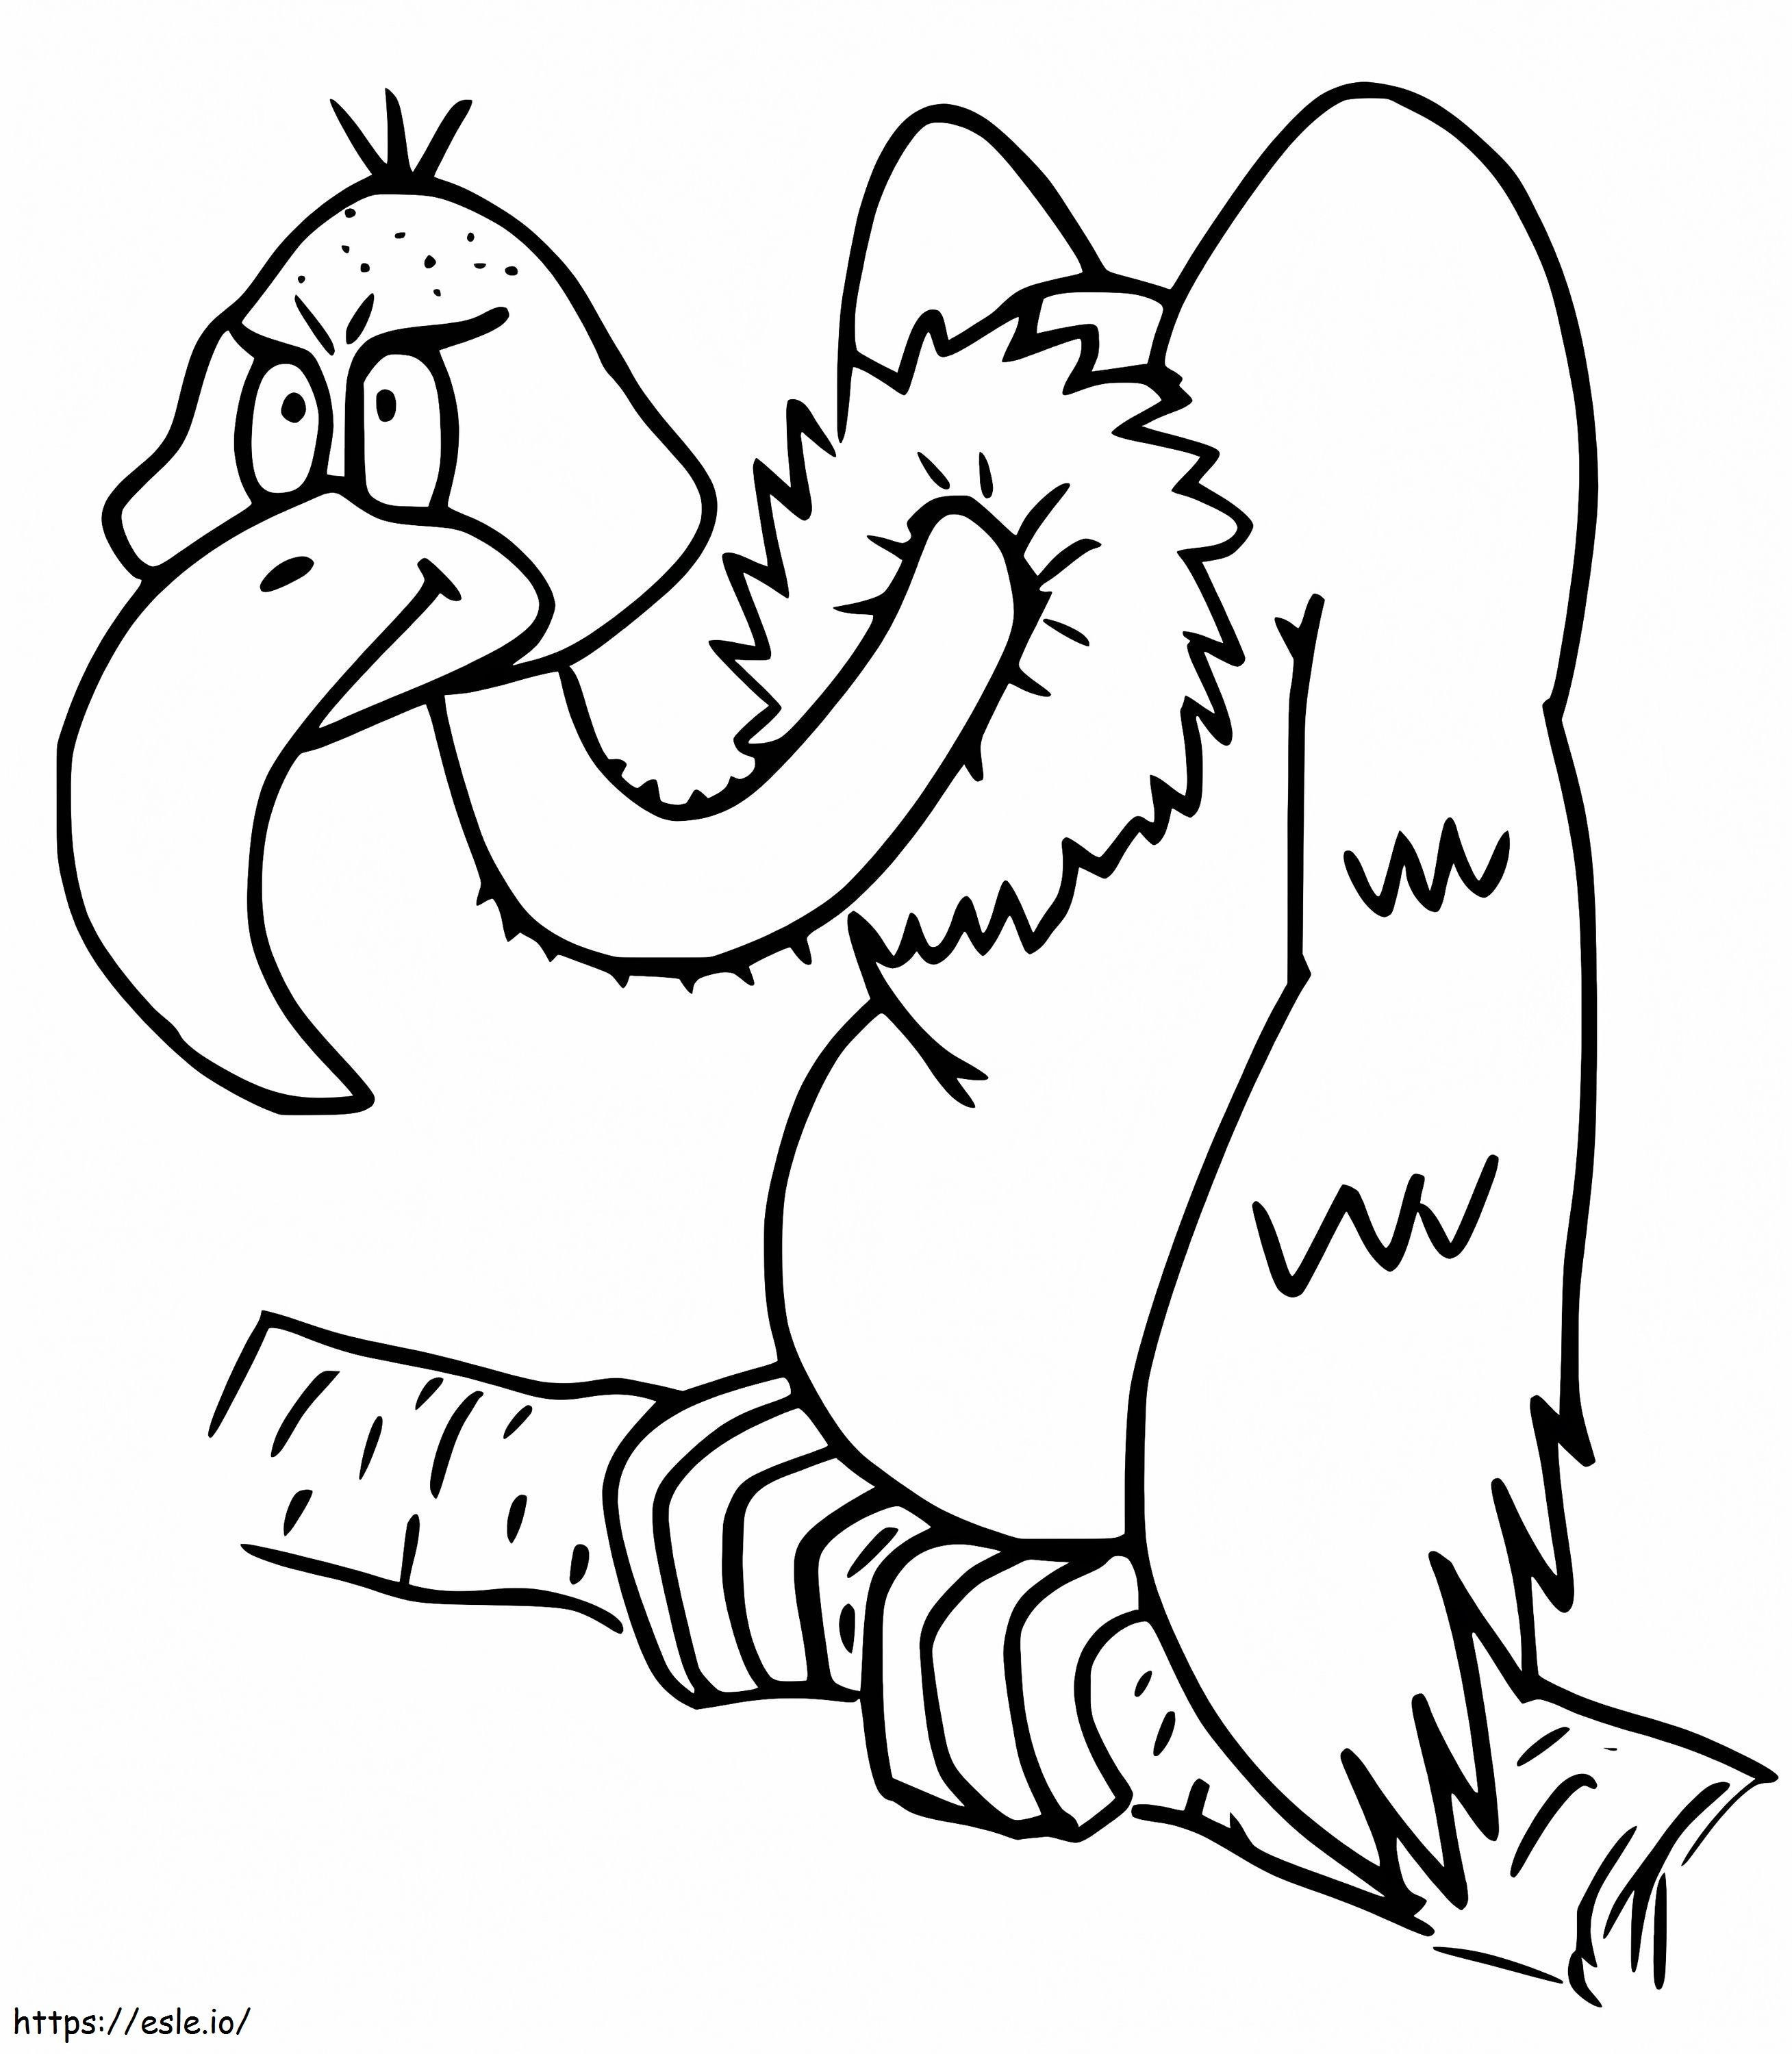 Vulture 9 coloring page